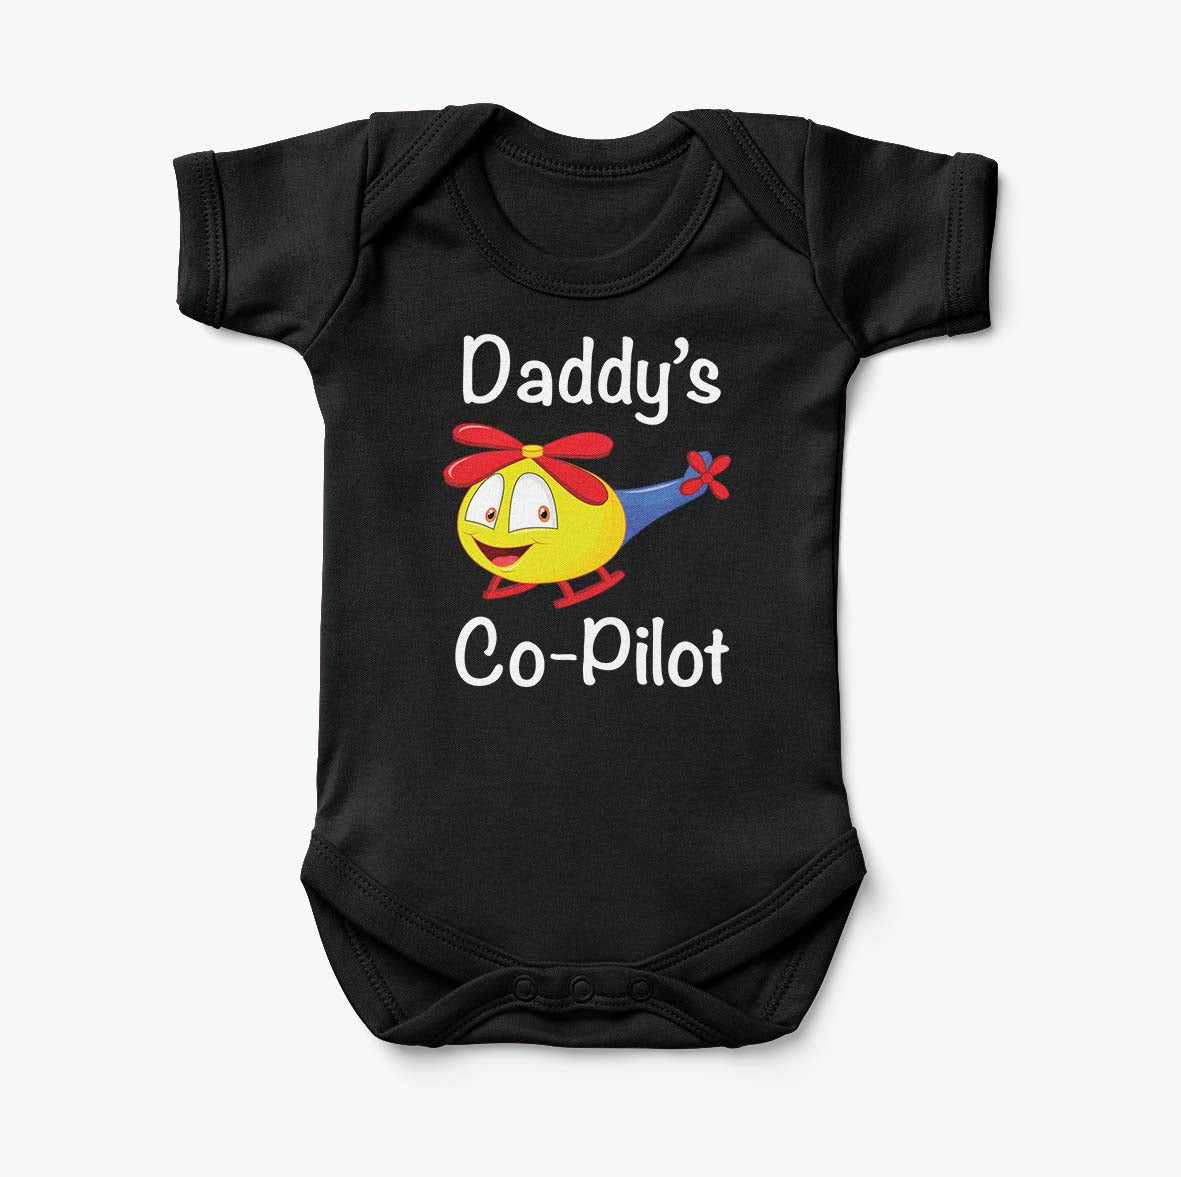 Daddy's Co-Pilot (Helicopter) Designed Baby Bodysuits